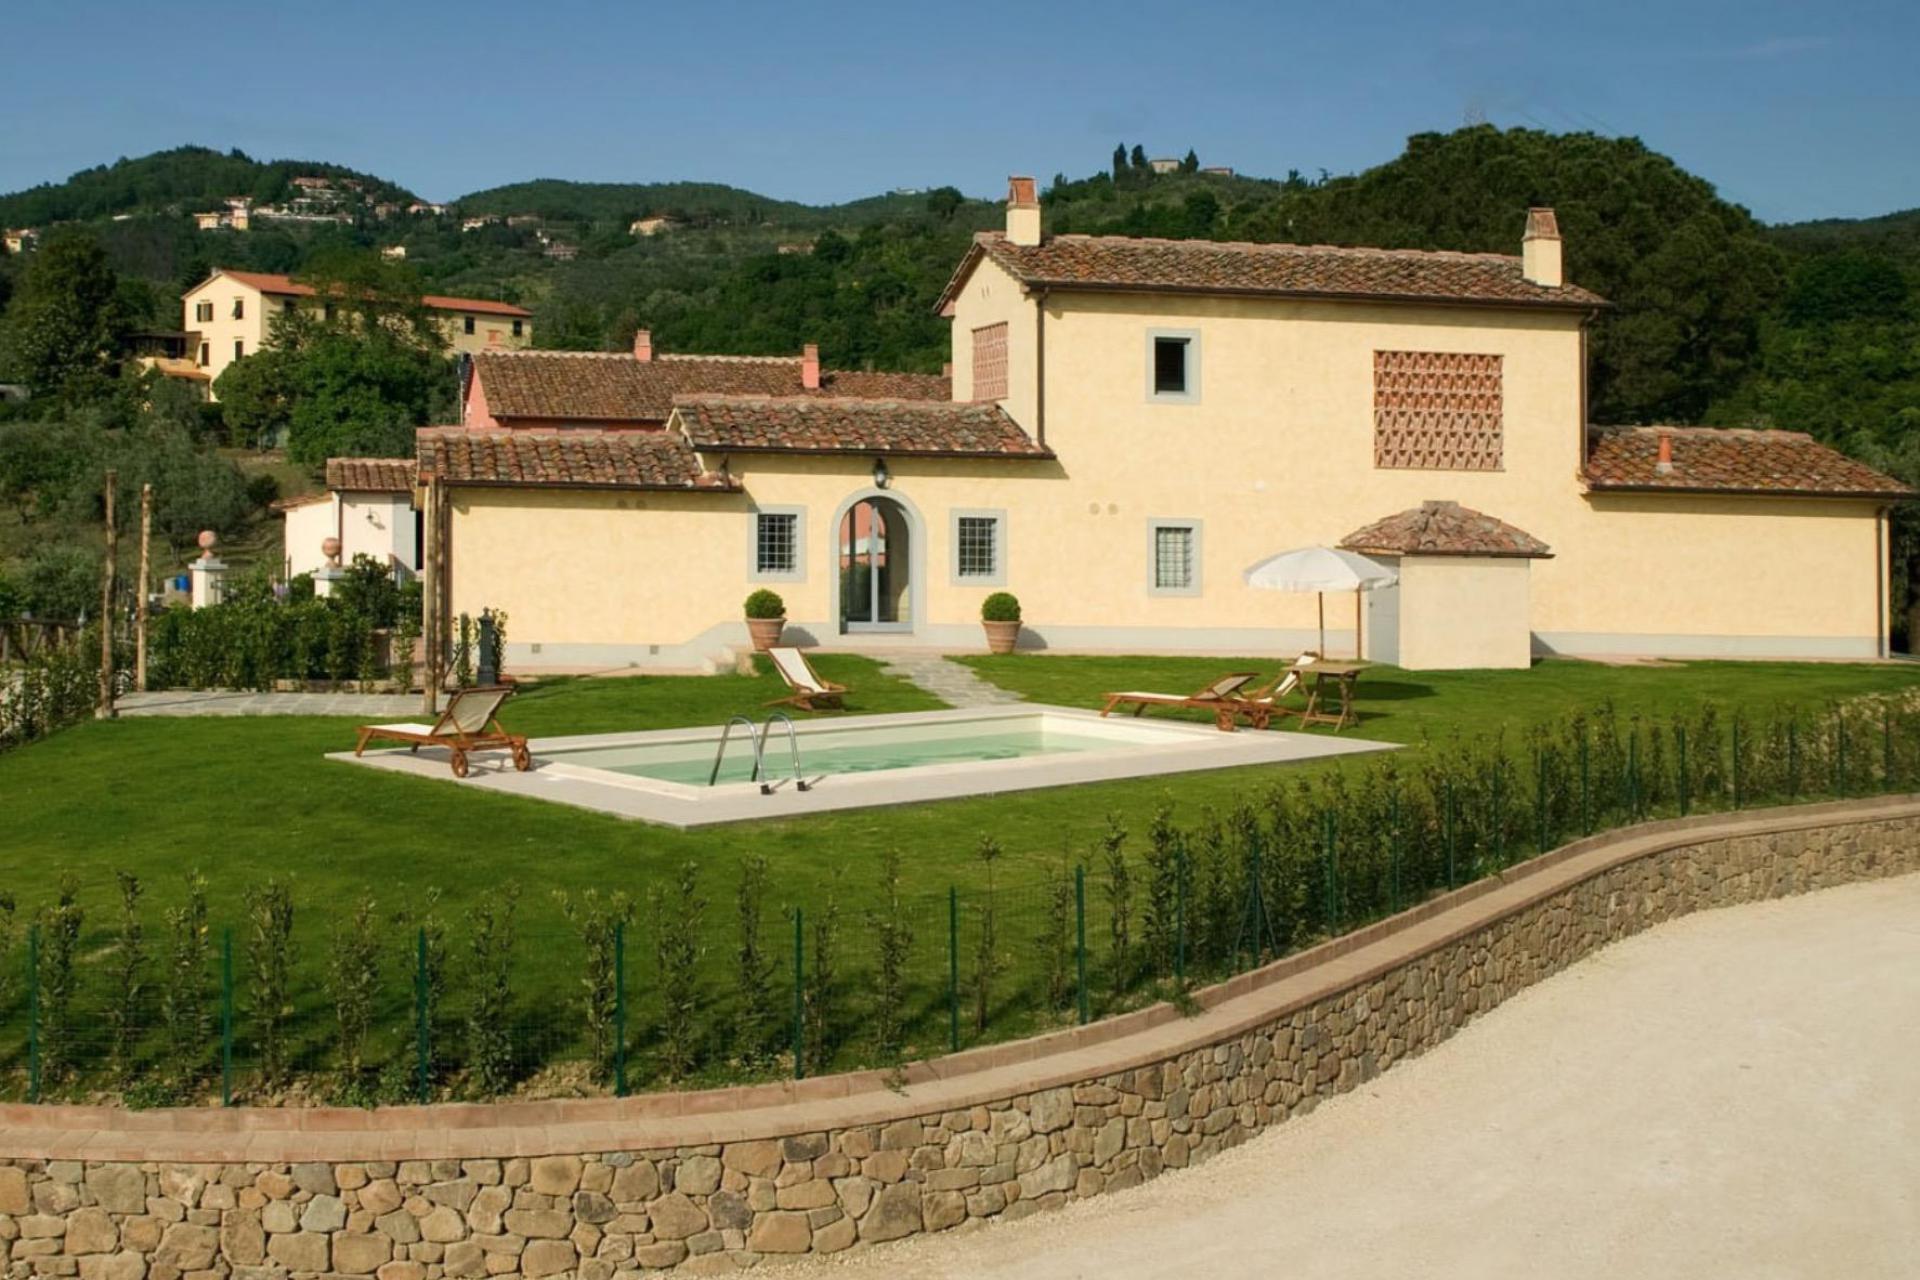 Ideal agriturismo for families with 19-hectare site and sheep